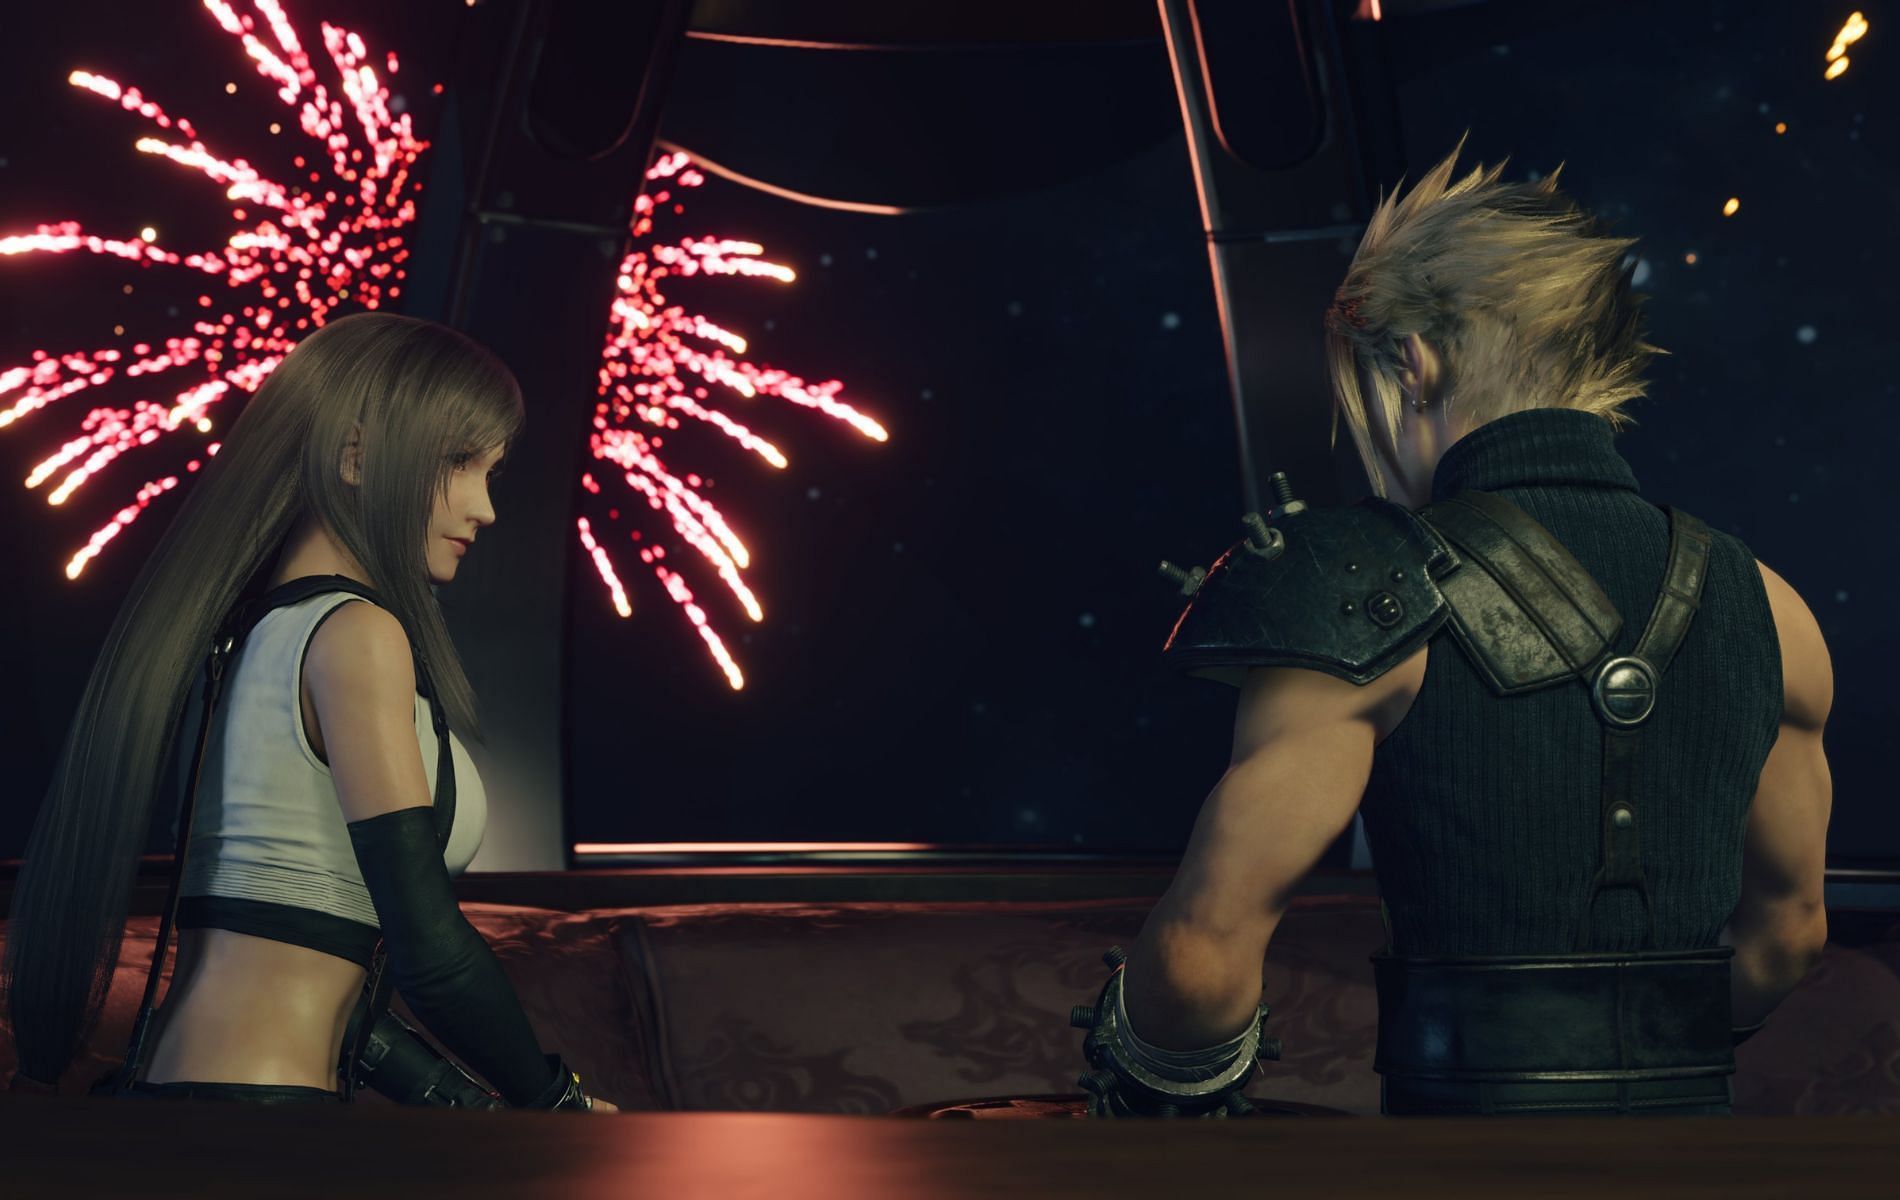 Tifa and Cloud from Final Fantasy 7 